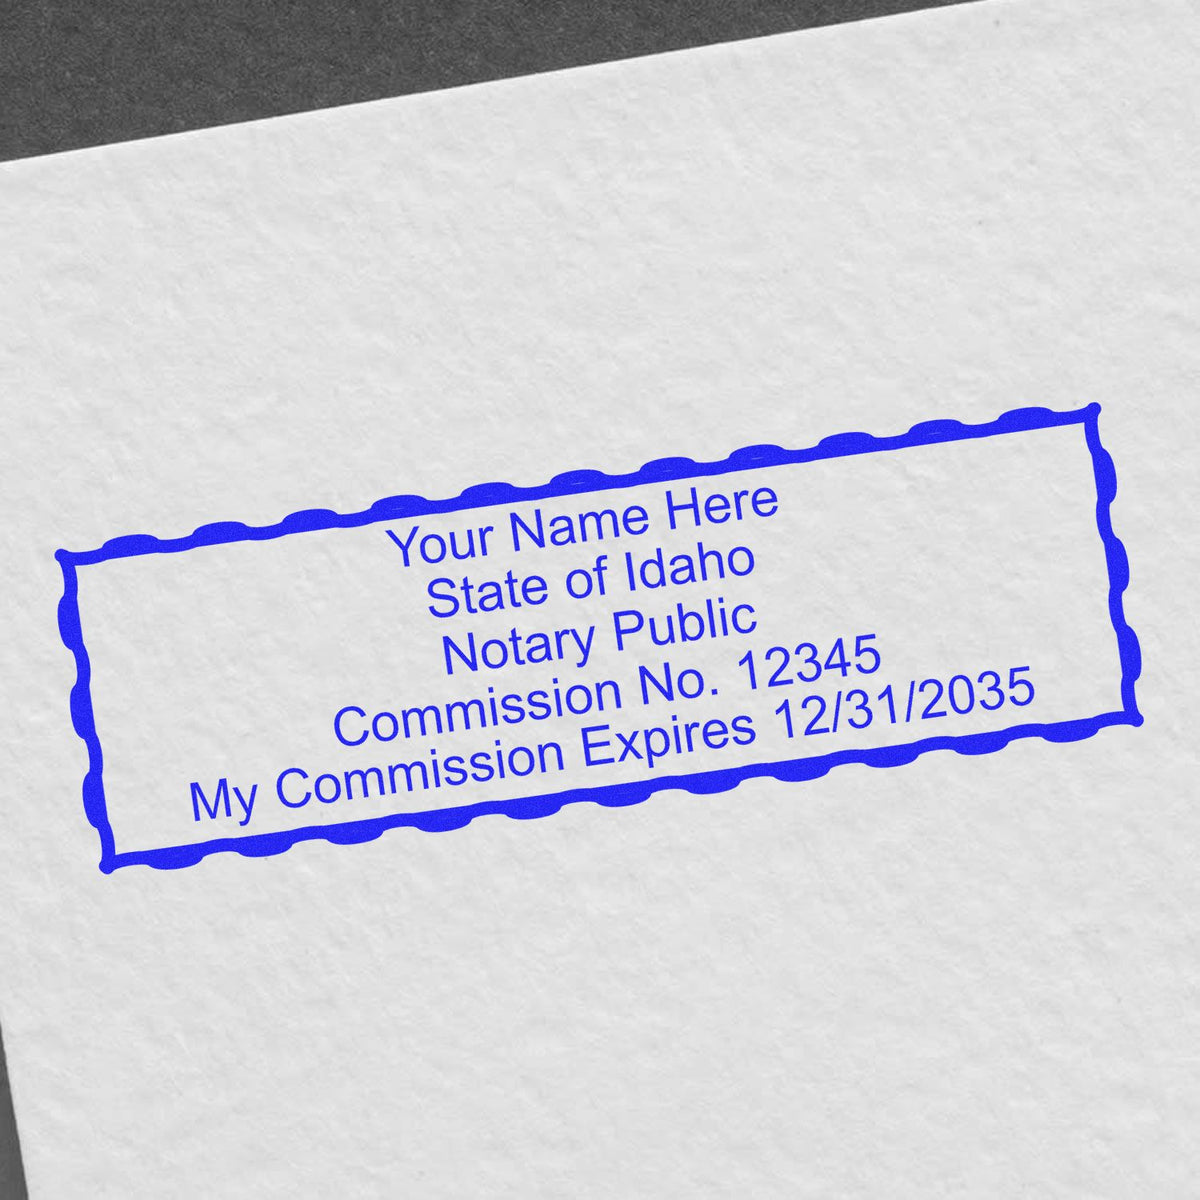 The PSI Idaho Notary Stamp stamp impression comes to life with a crisp, detailed photo on paper - showcasing true professional quality.